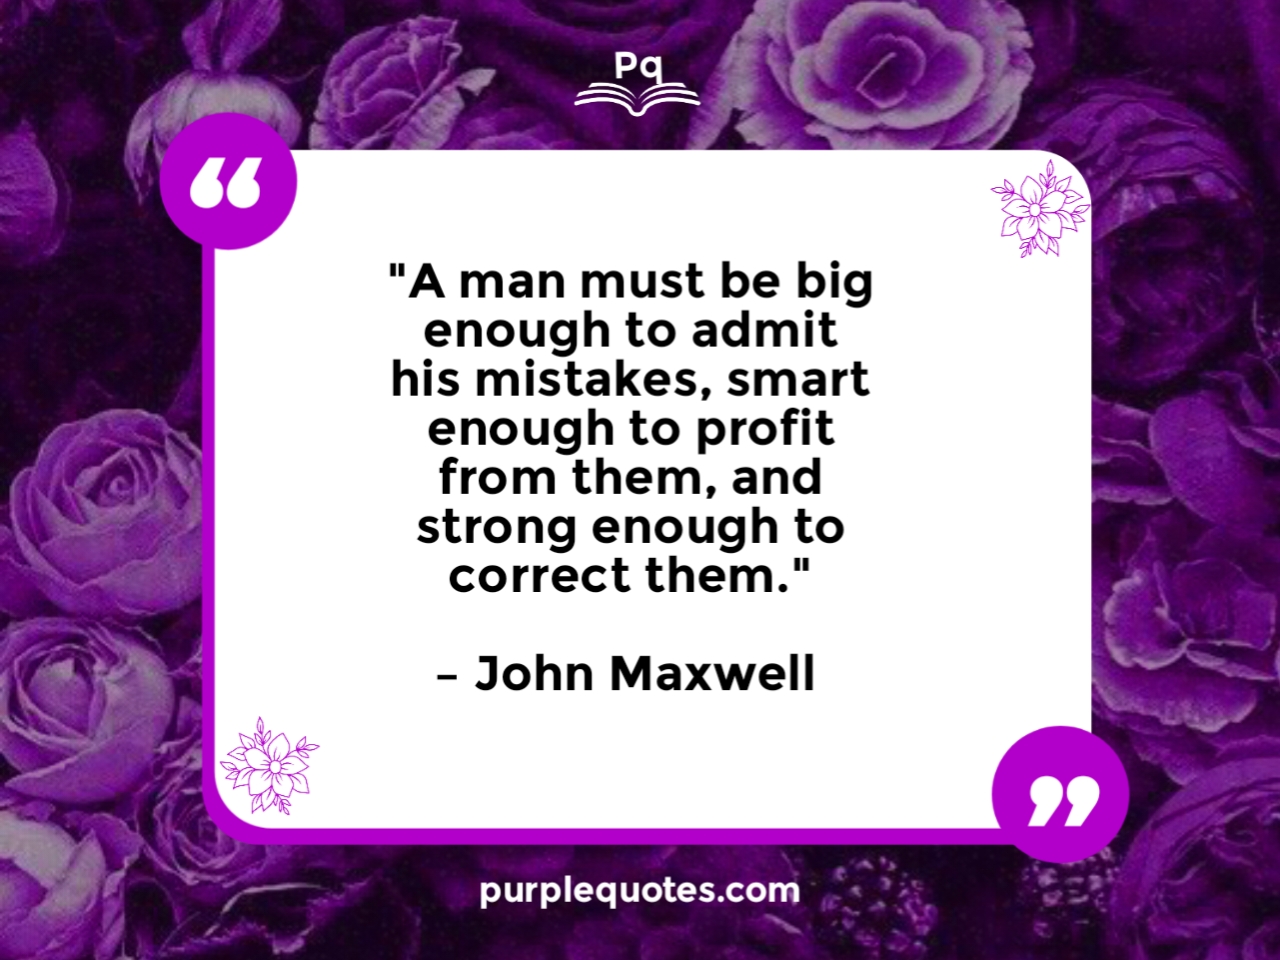 "A man must be big enough to admit his mistakes, smart enough to profit from them, and strong enough to correct them."